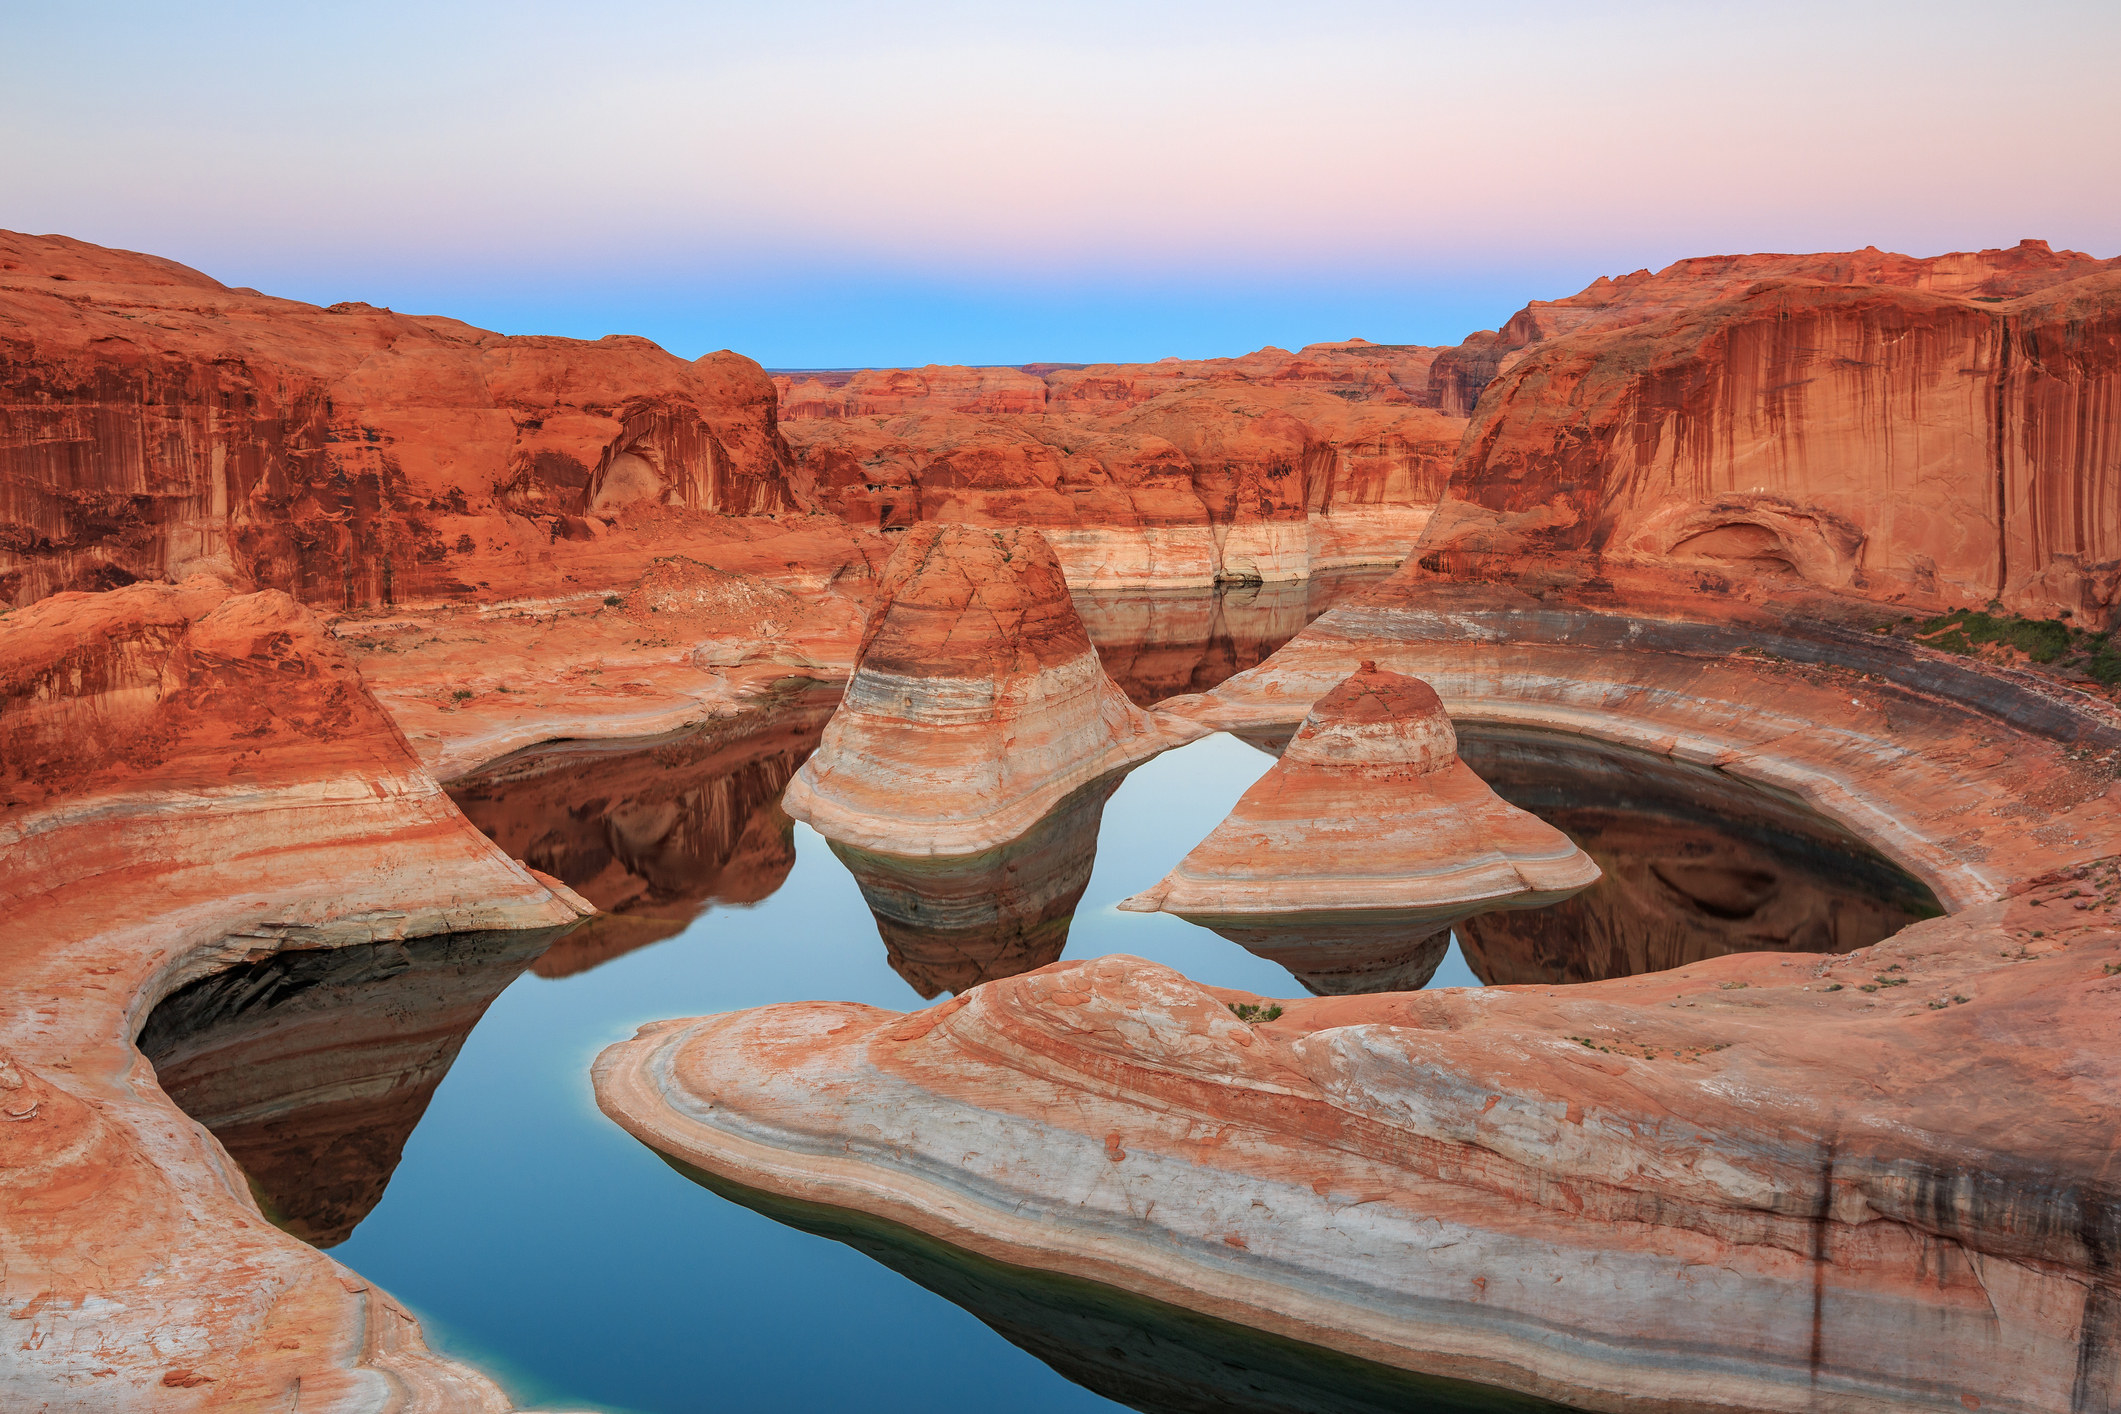 Dusk sky above a red canyon being reflected in waters of Lake Powell